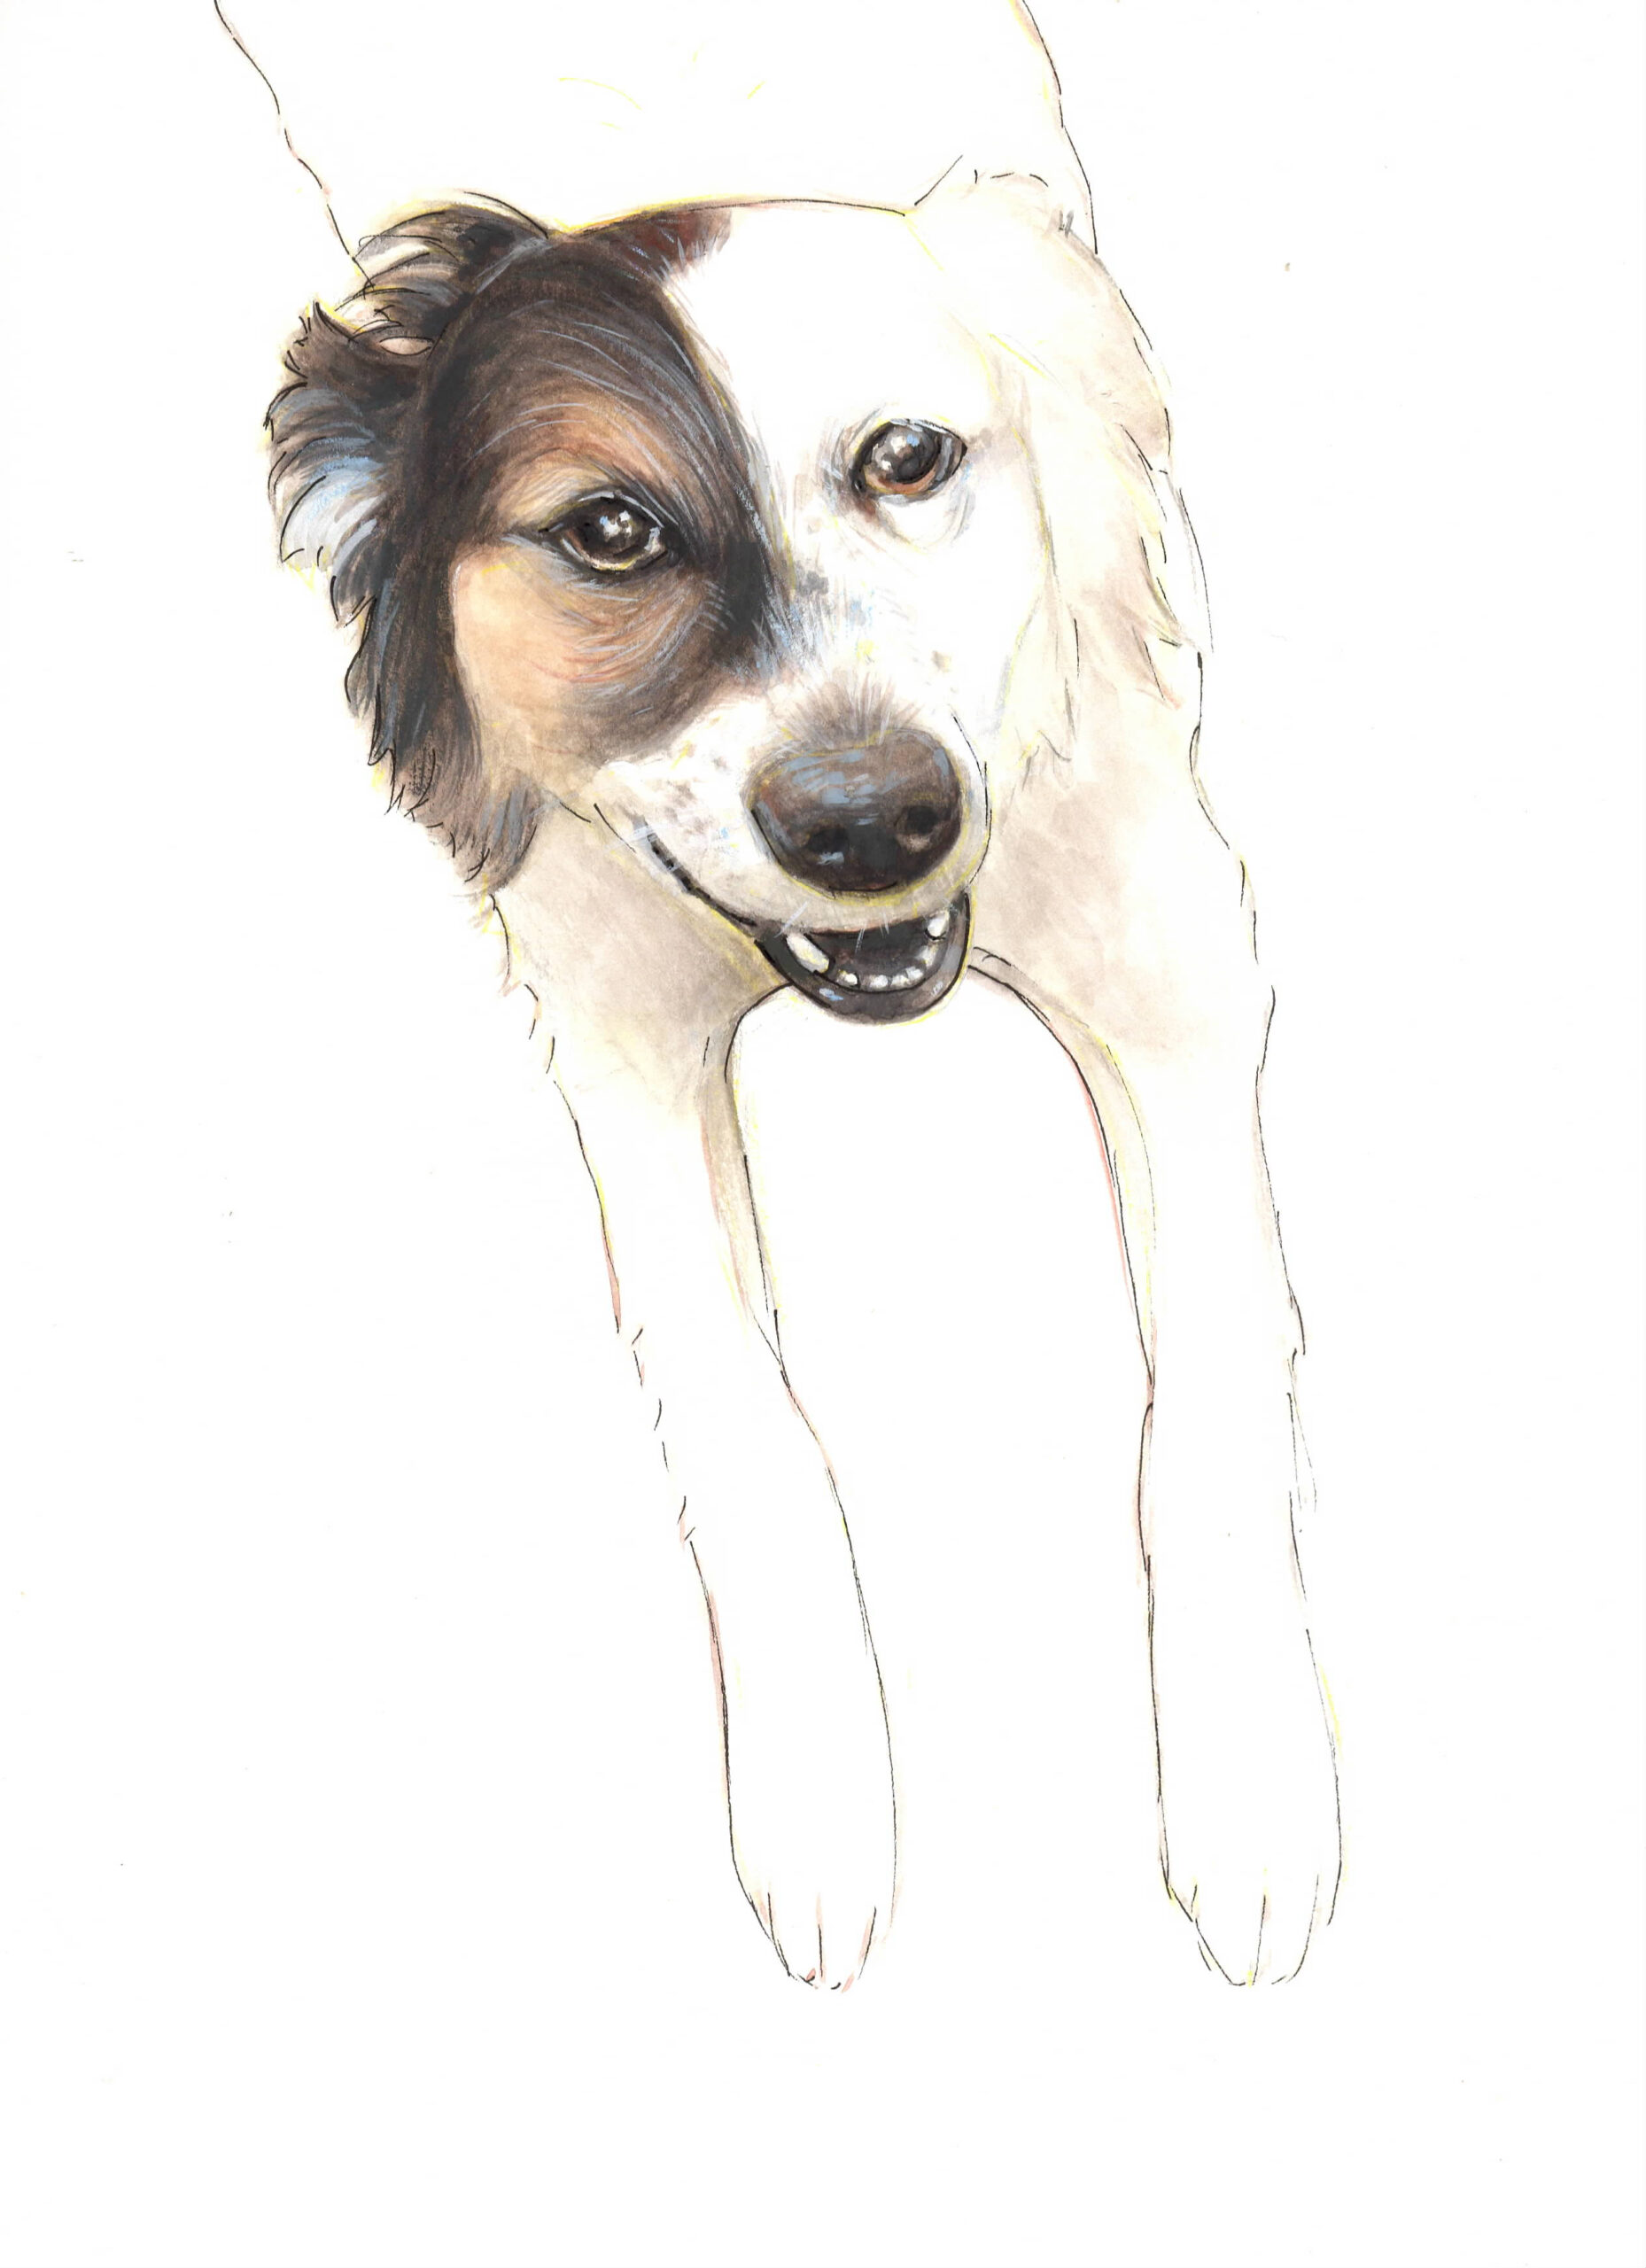 Watercolor portrait of a border collie named Daisy.